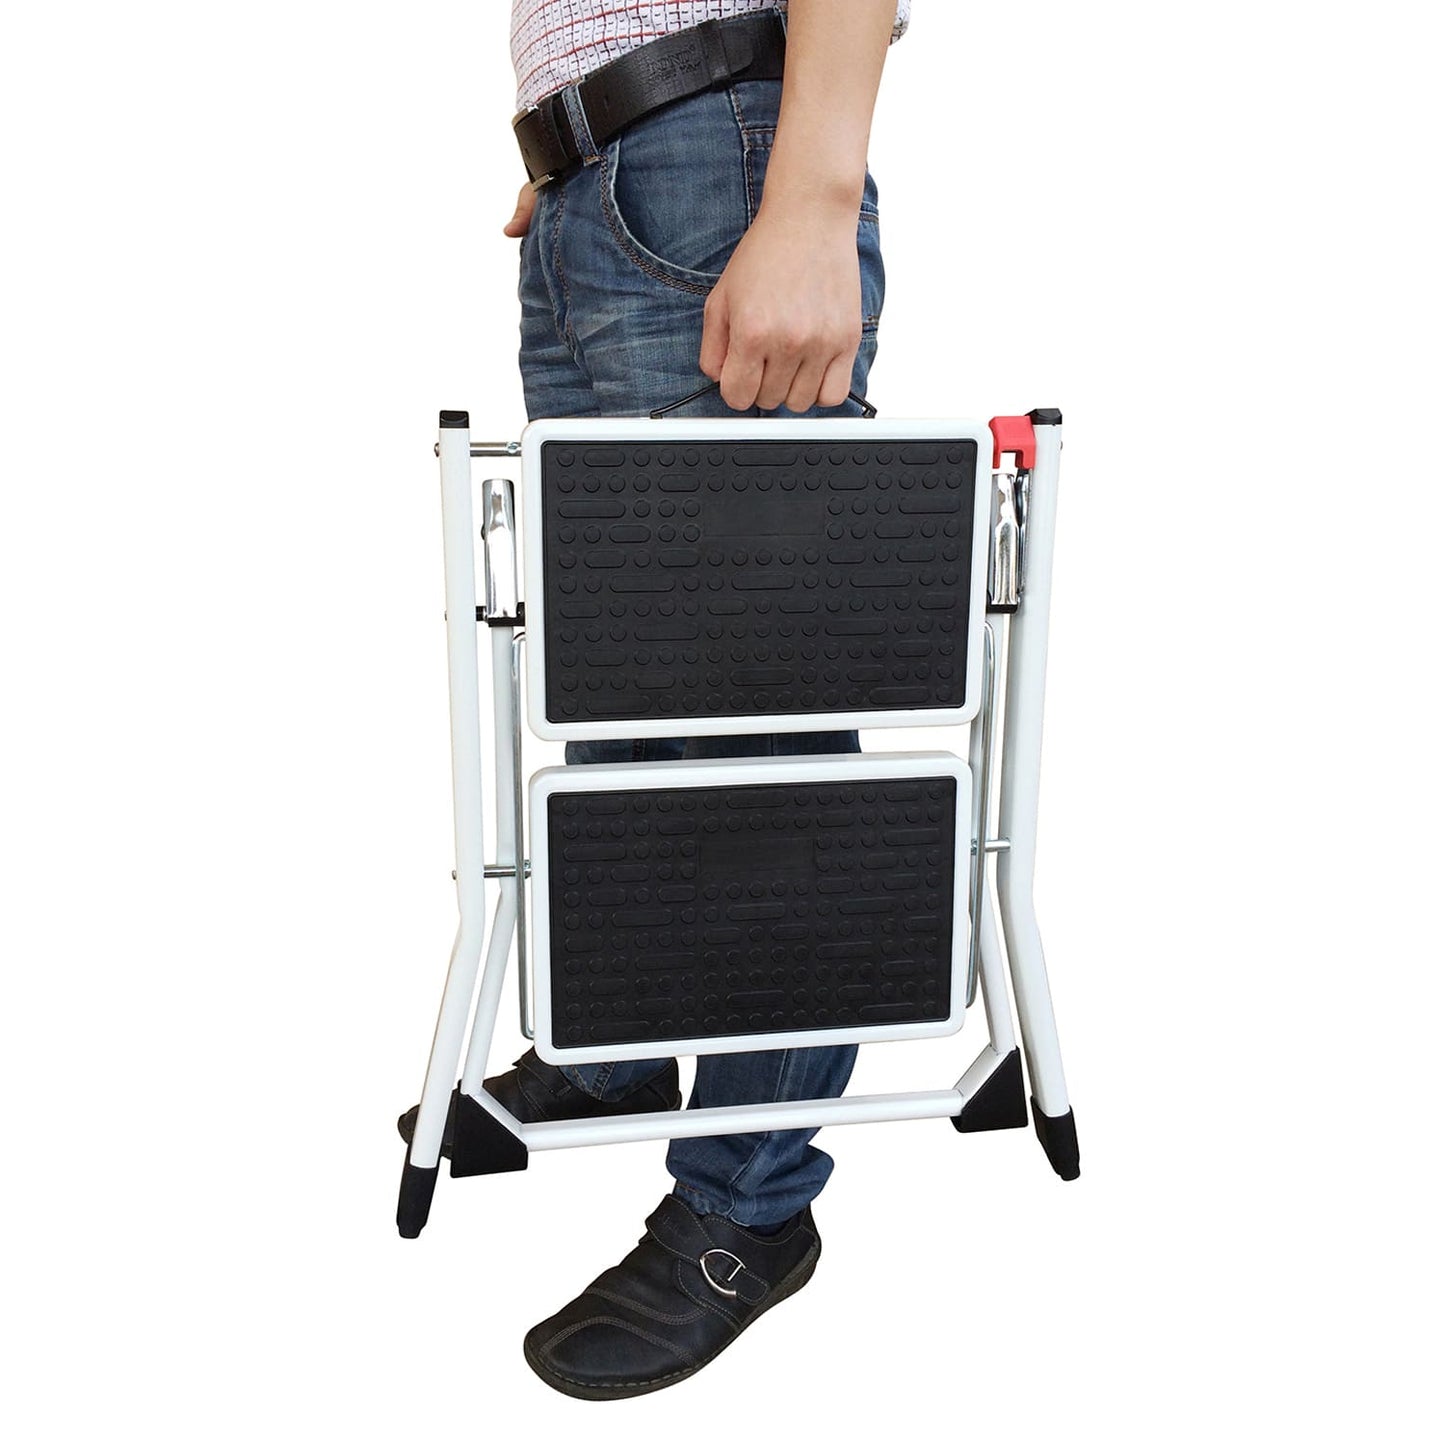 Ladder is foldable, comes with a carry handle